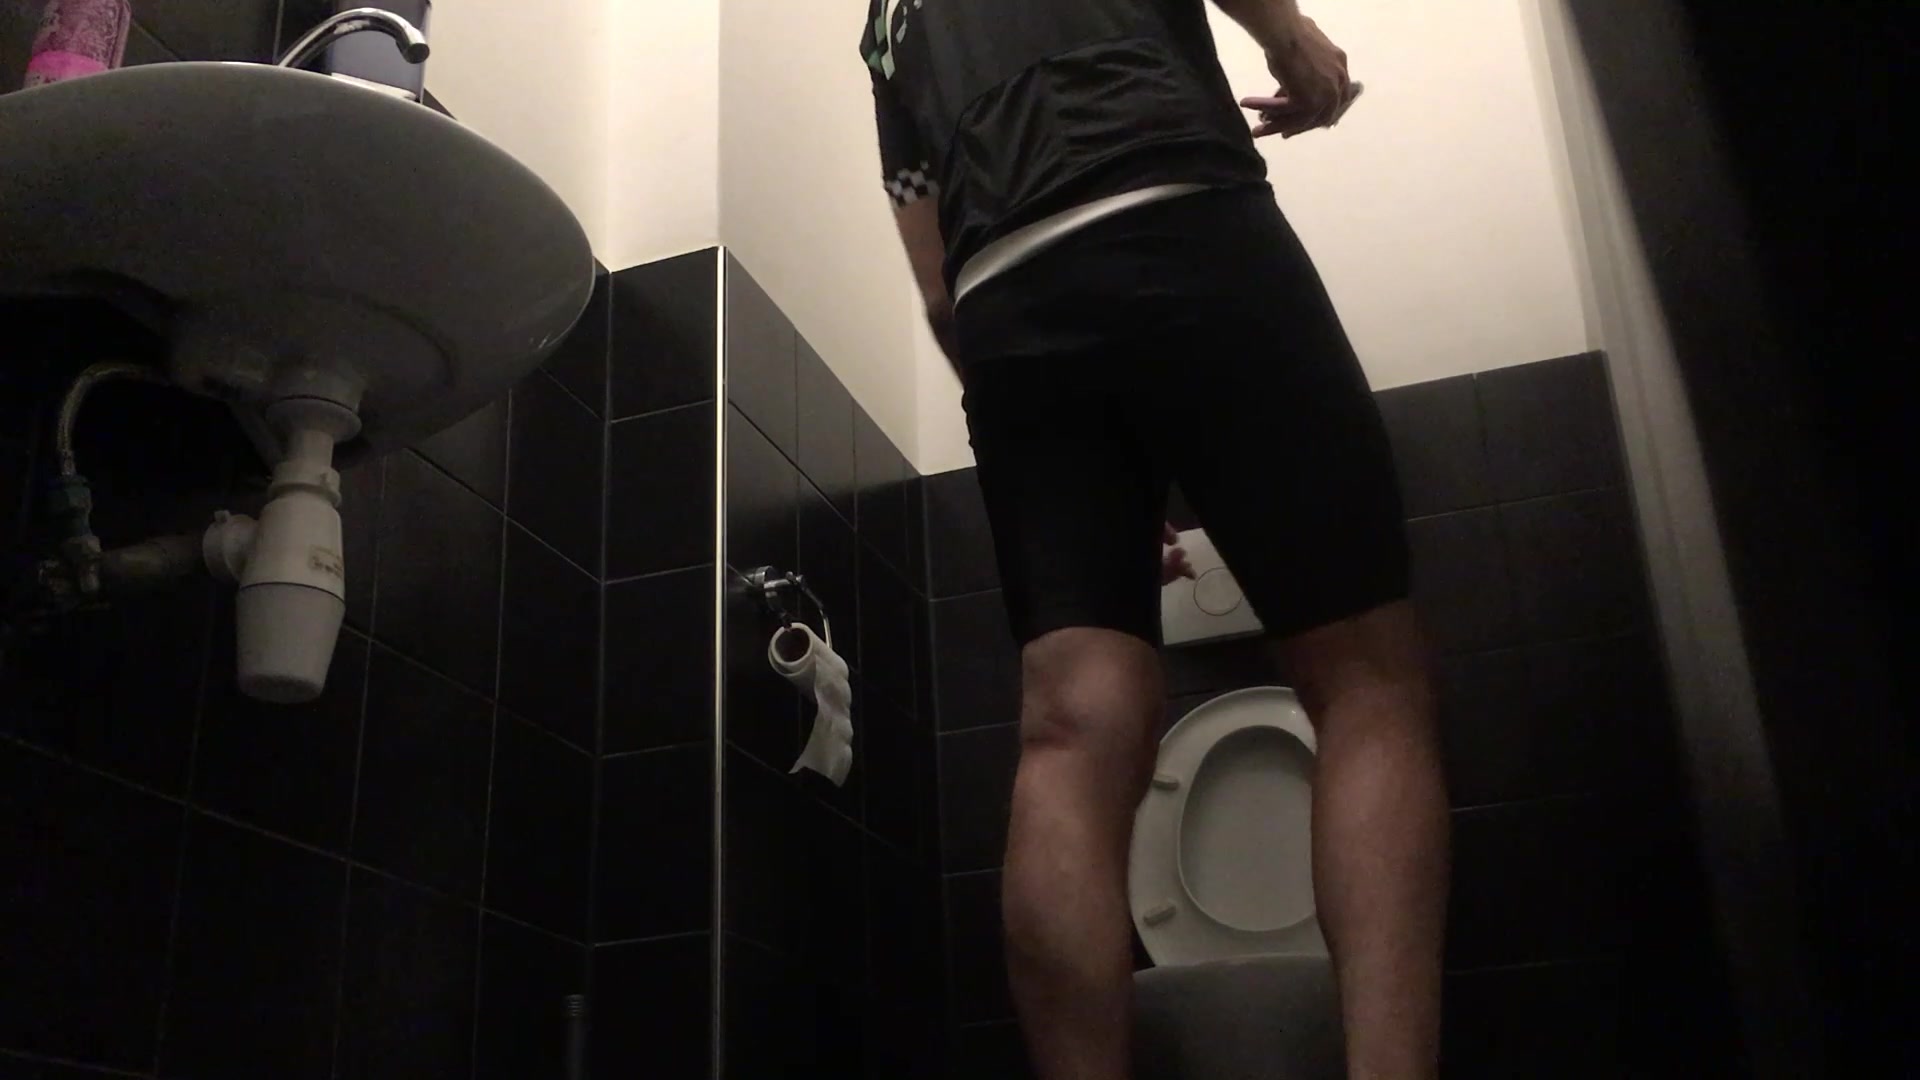 Spying on 2 guys pissing at work. 